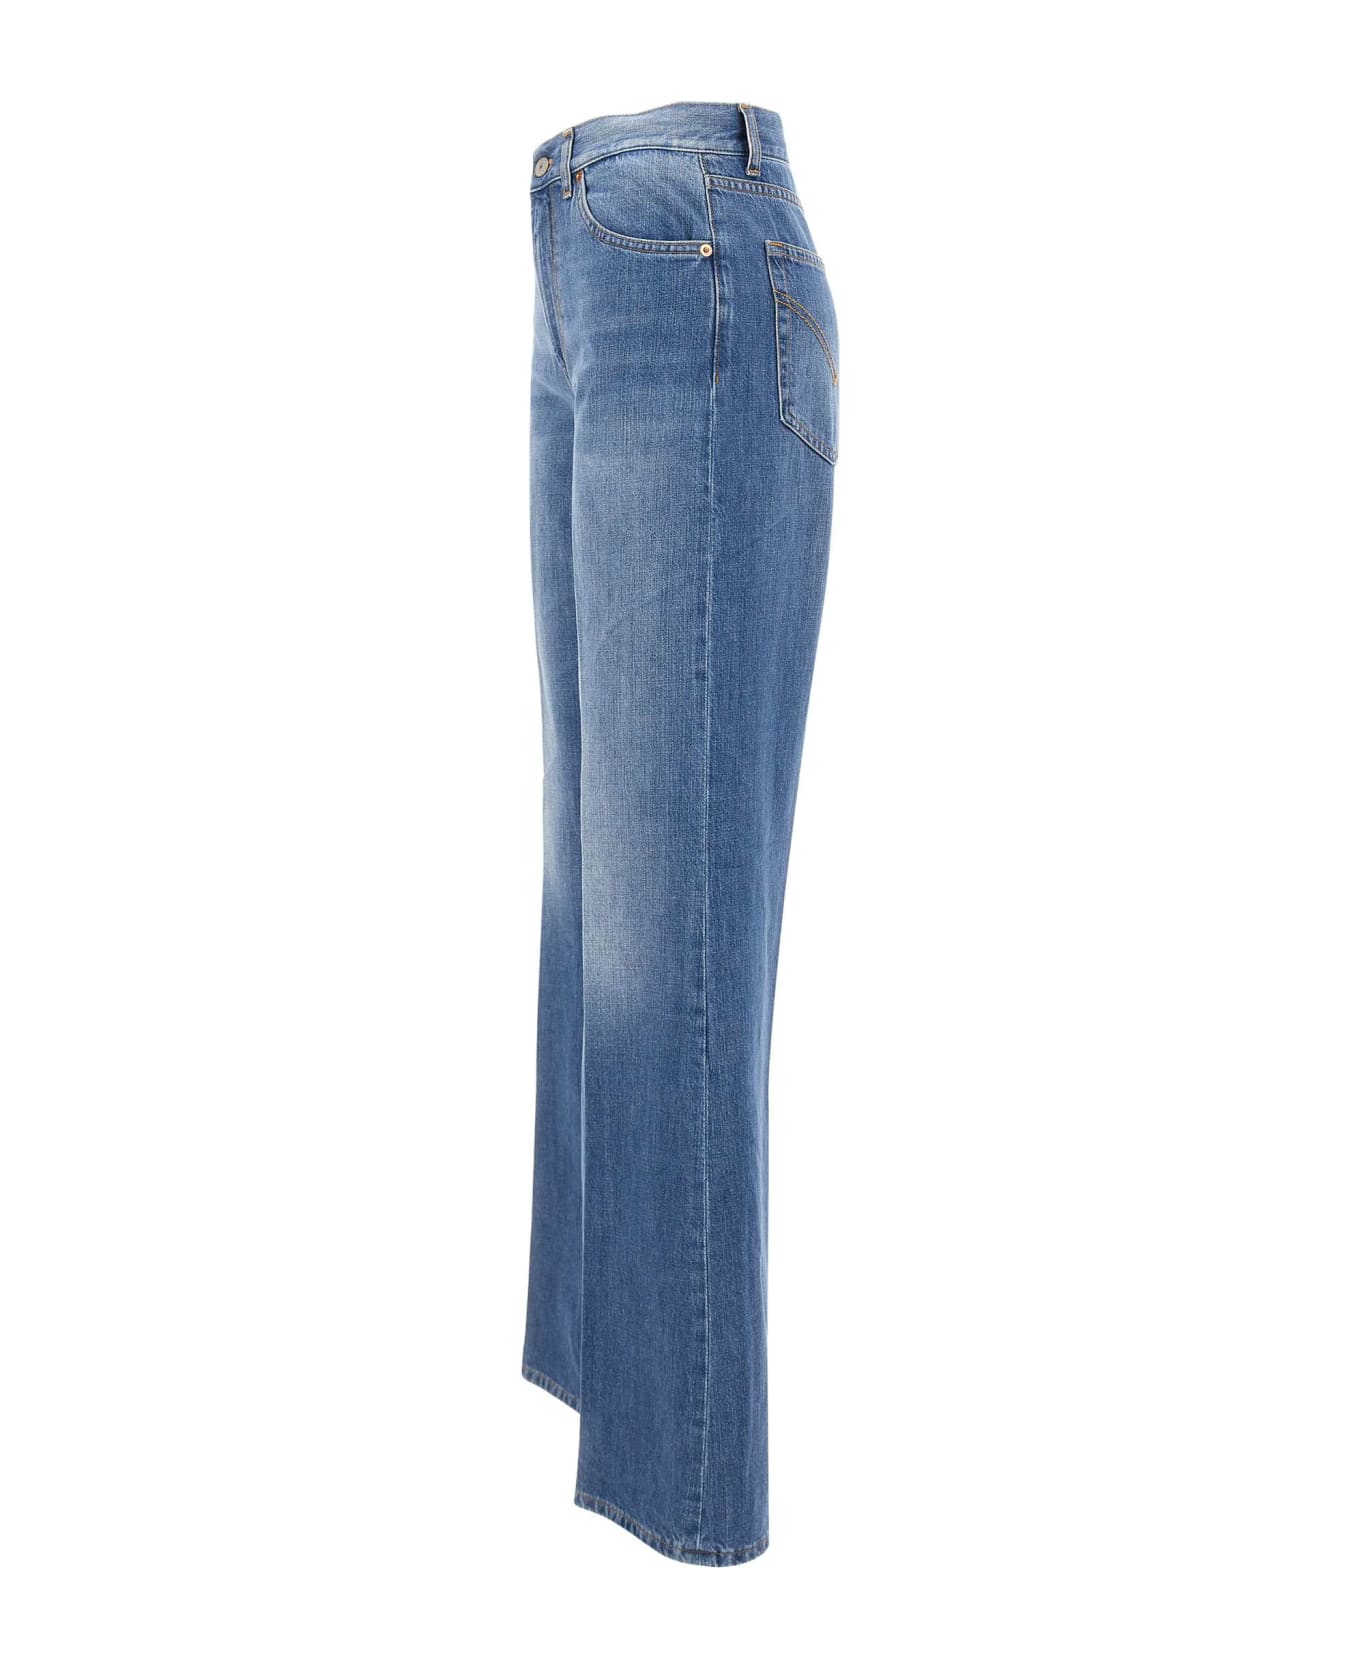 Dondup "amber" Jeans - BLUE